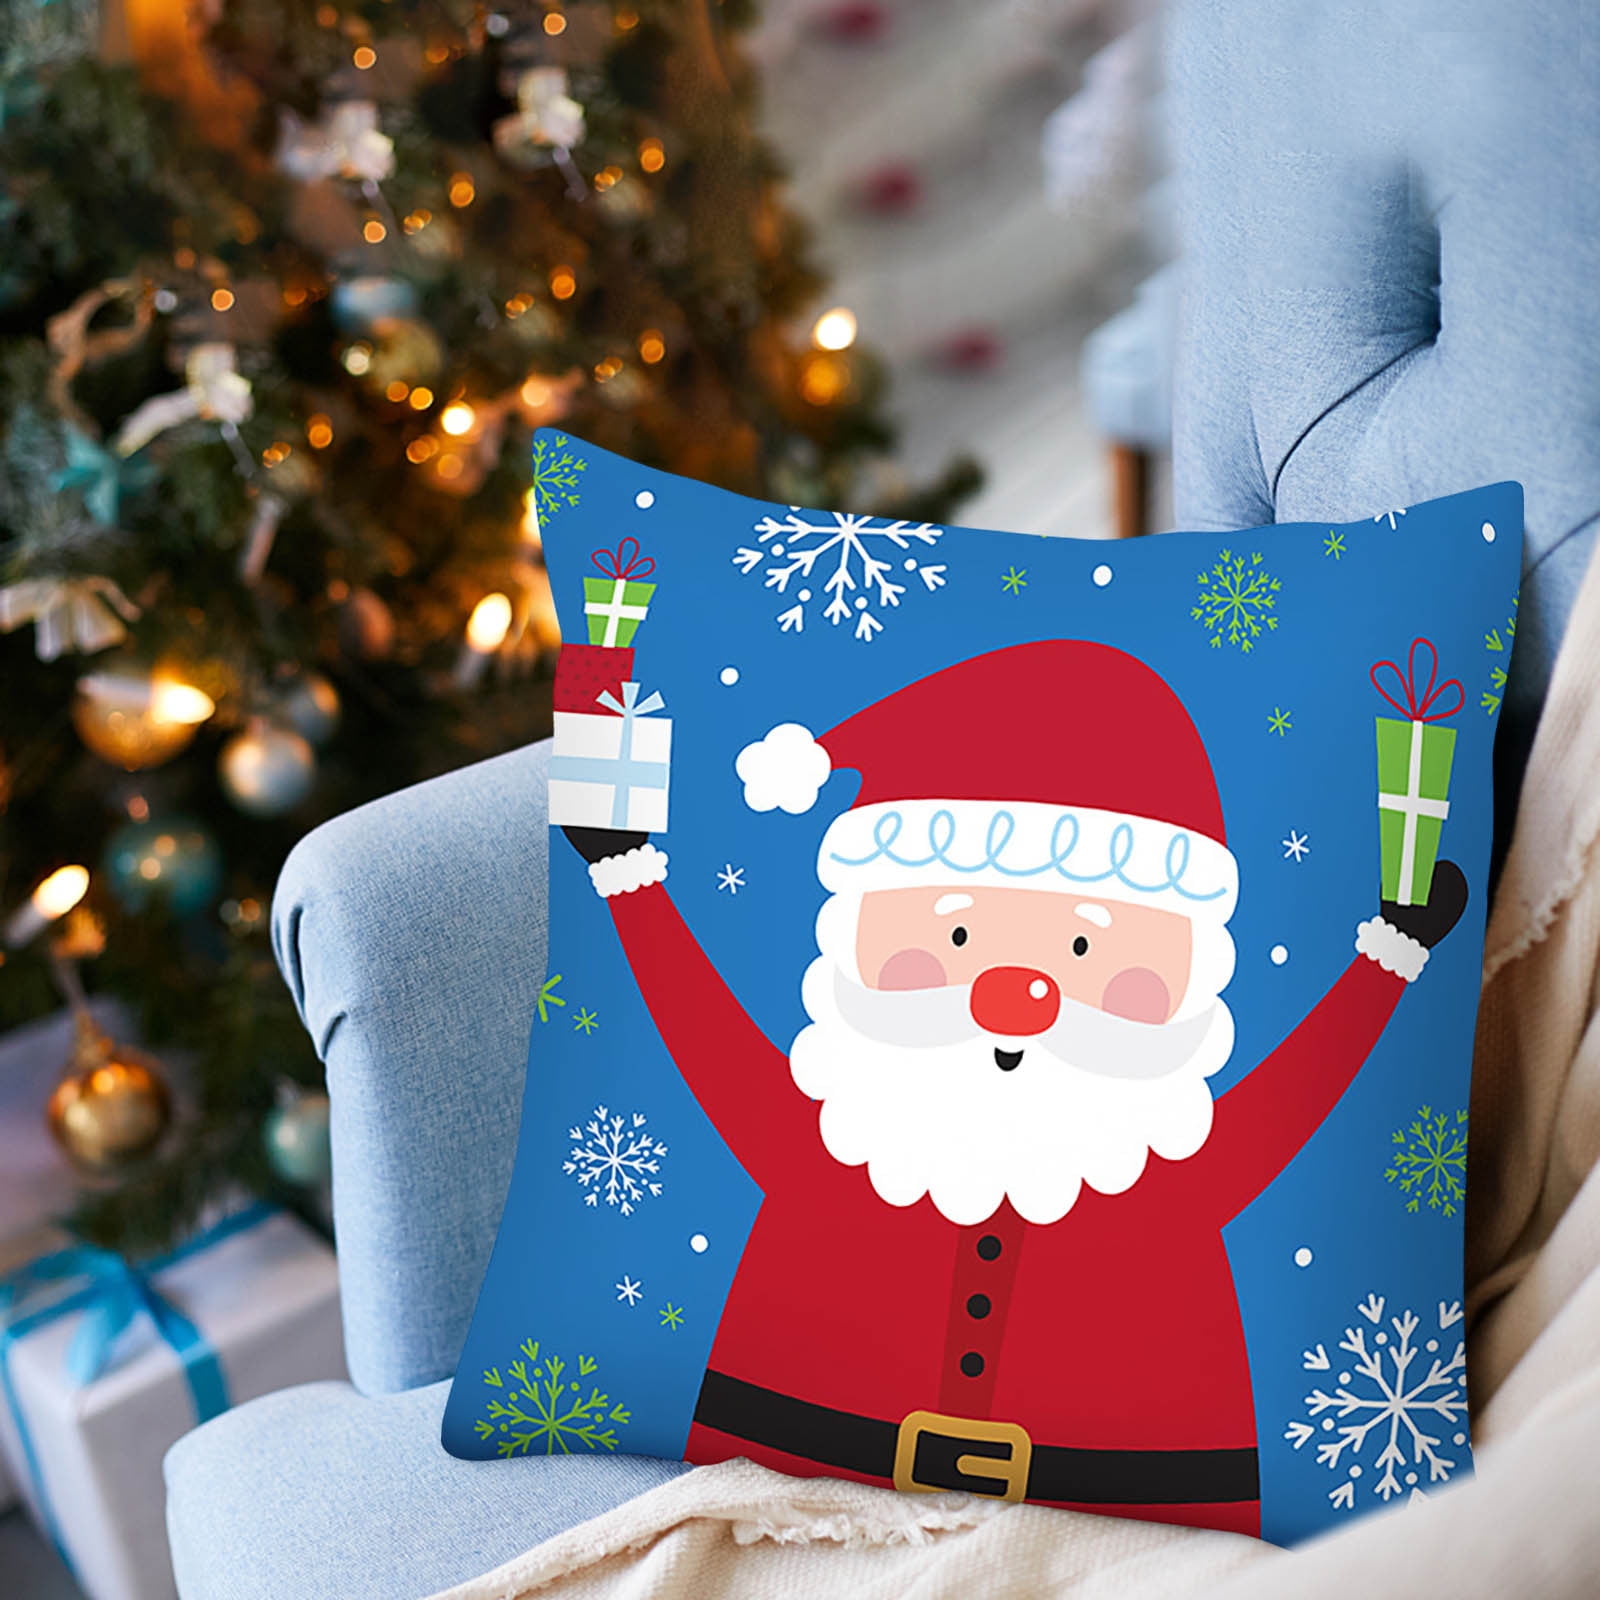 FuWeave Vintage Christmas Pillow Covers 18x18 Set of 6 Red Retro Christmas  Santa Candy Cane Square Pillowcases Christmas Stockings Snowman Reindeer